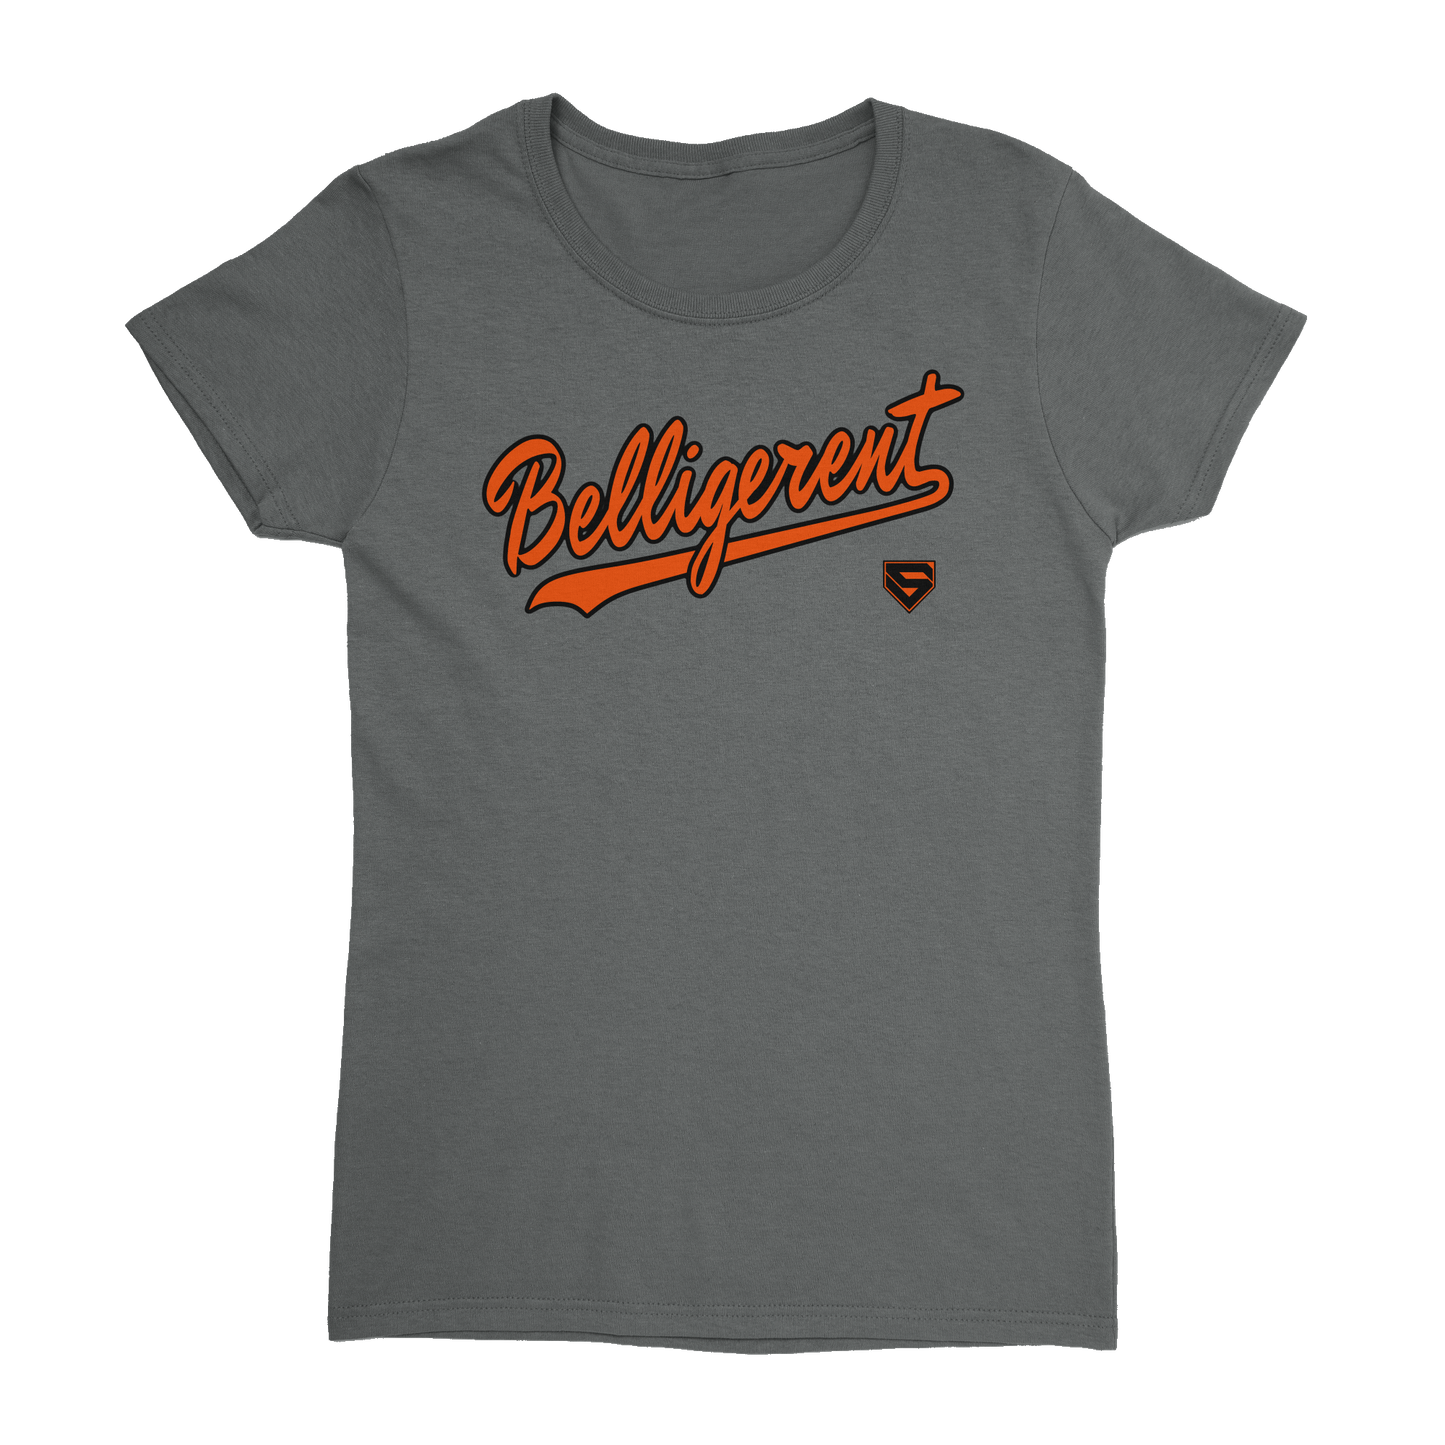 Belligerent Shirsey Women's Tee from Seamheaded Apparel